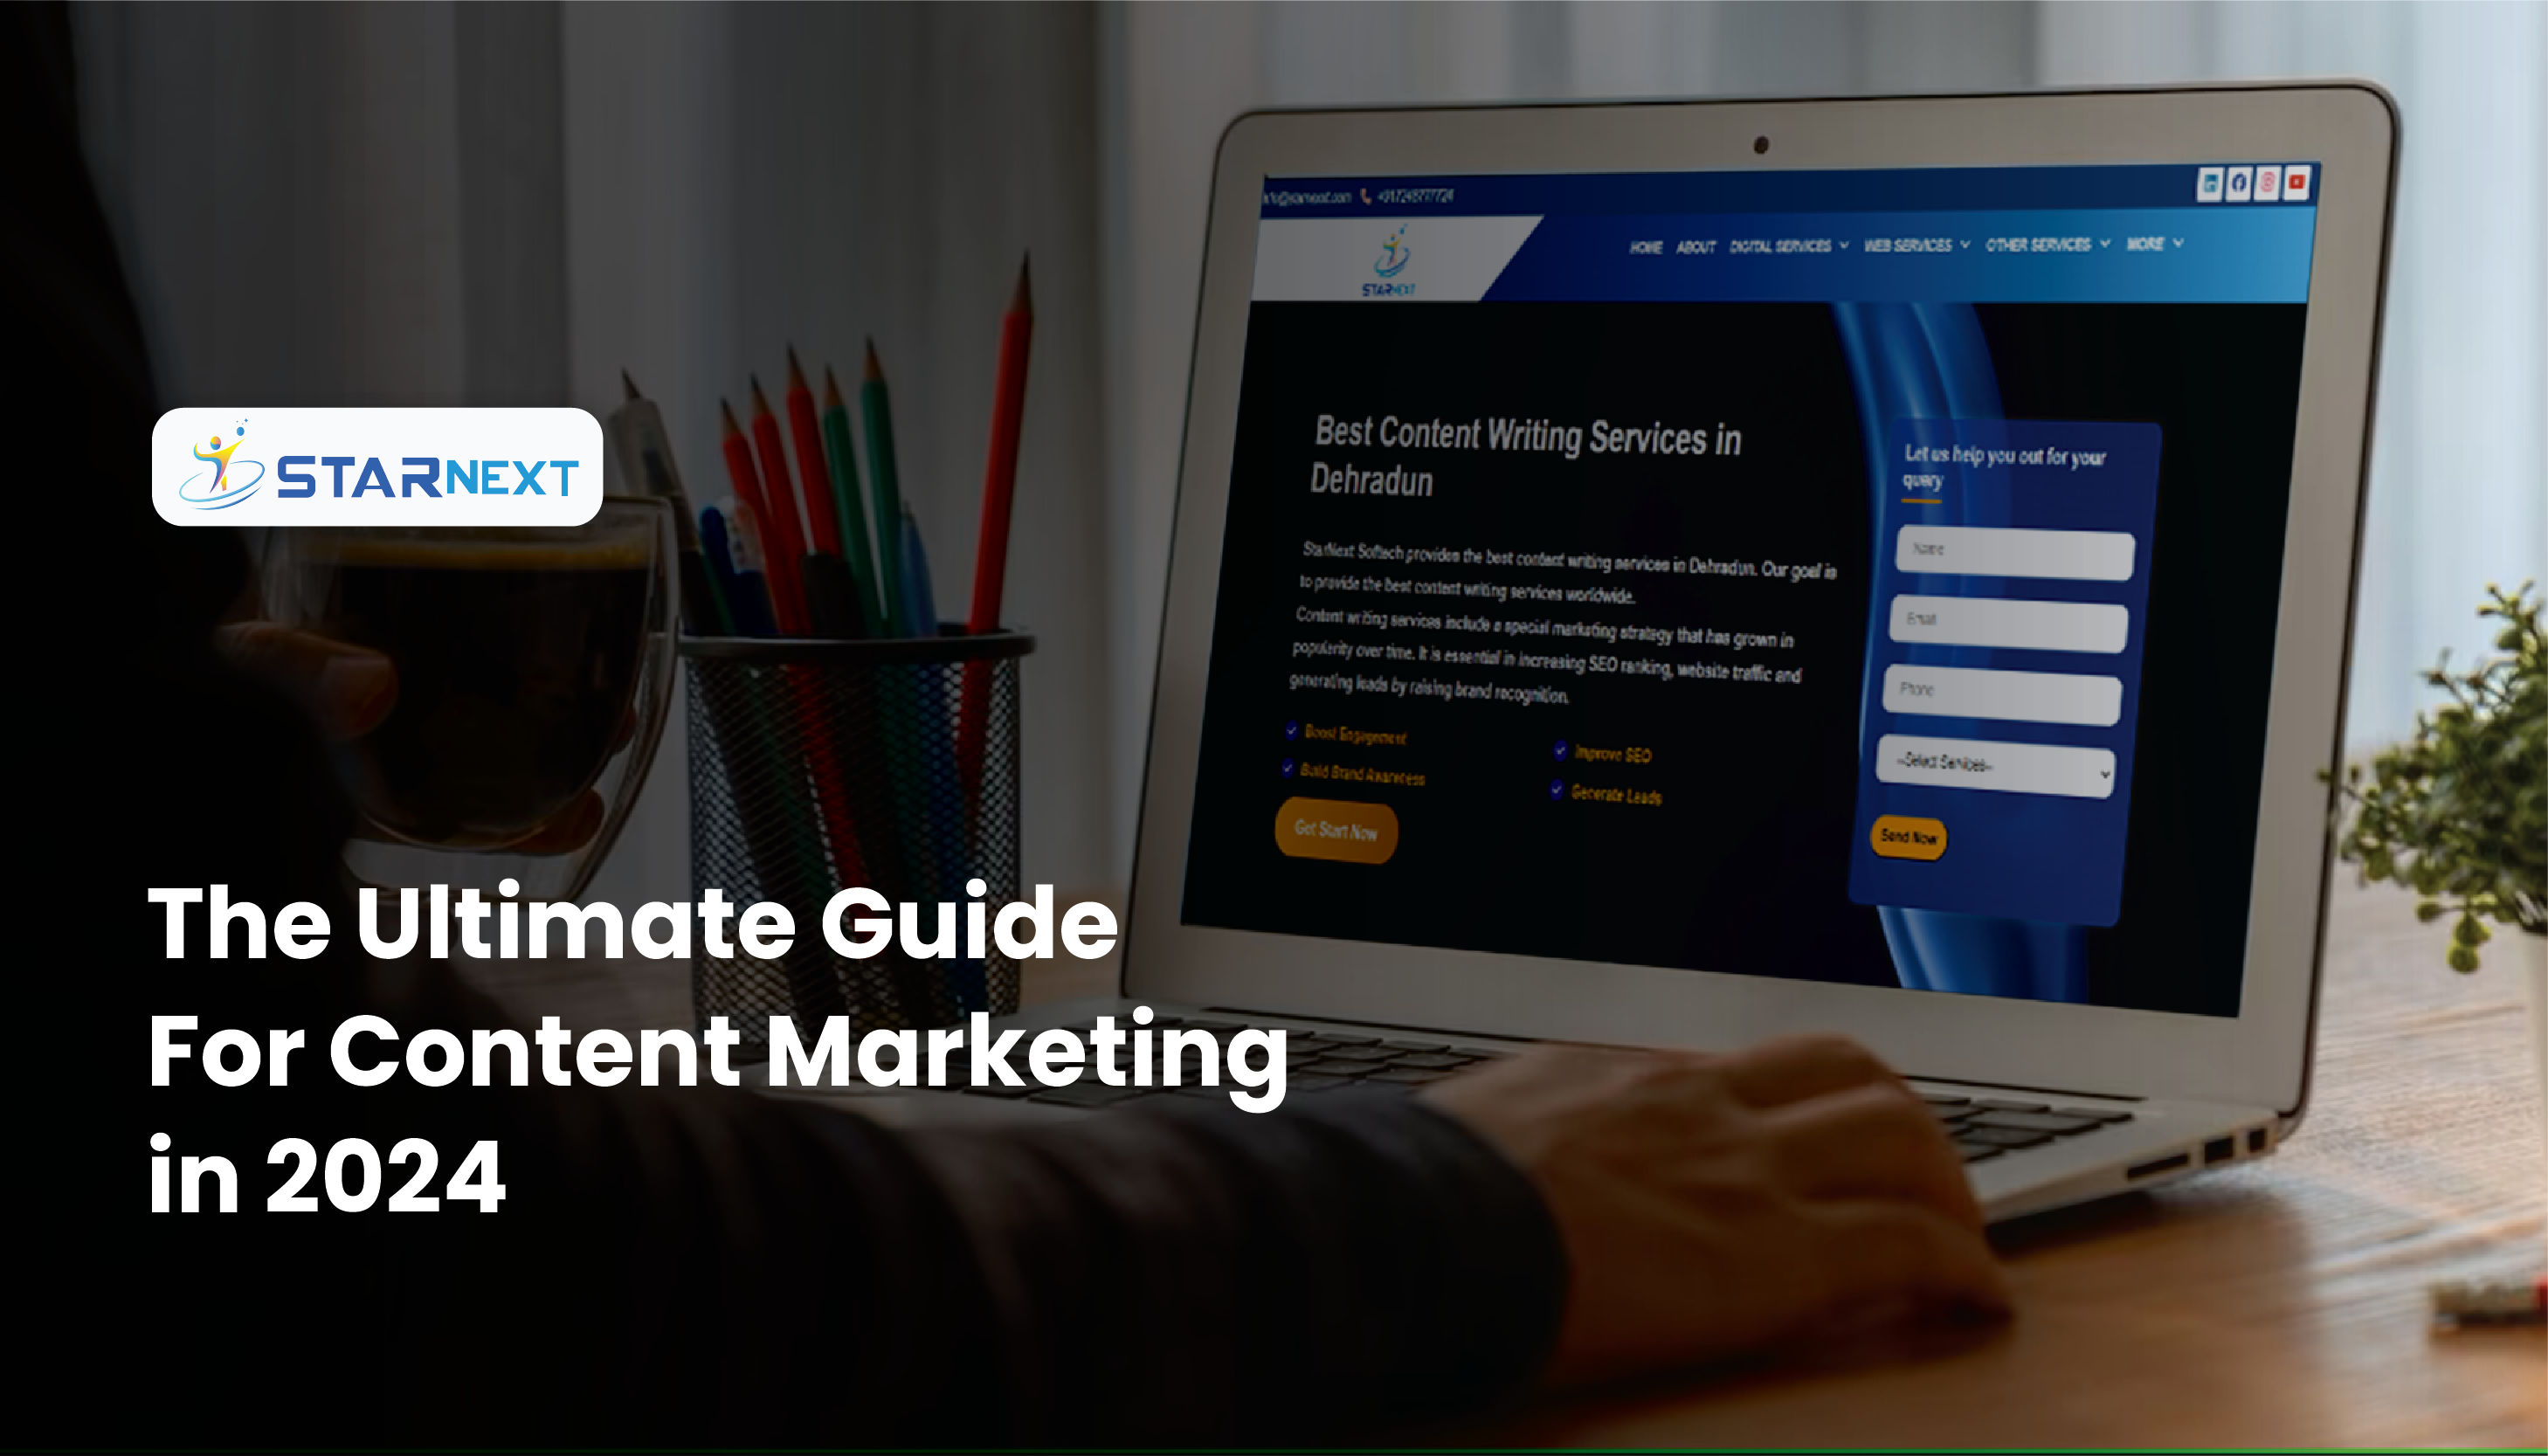 The Ultimate Guide For Content Marketing in 2024